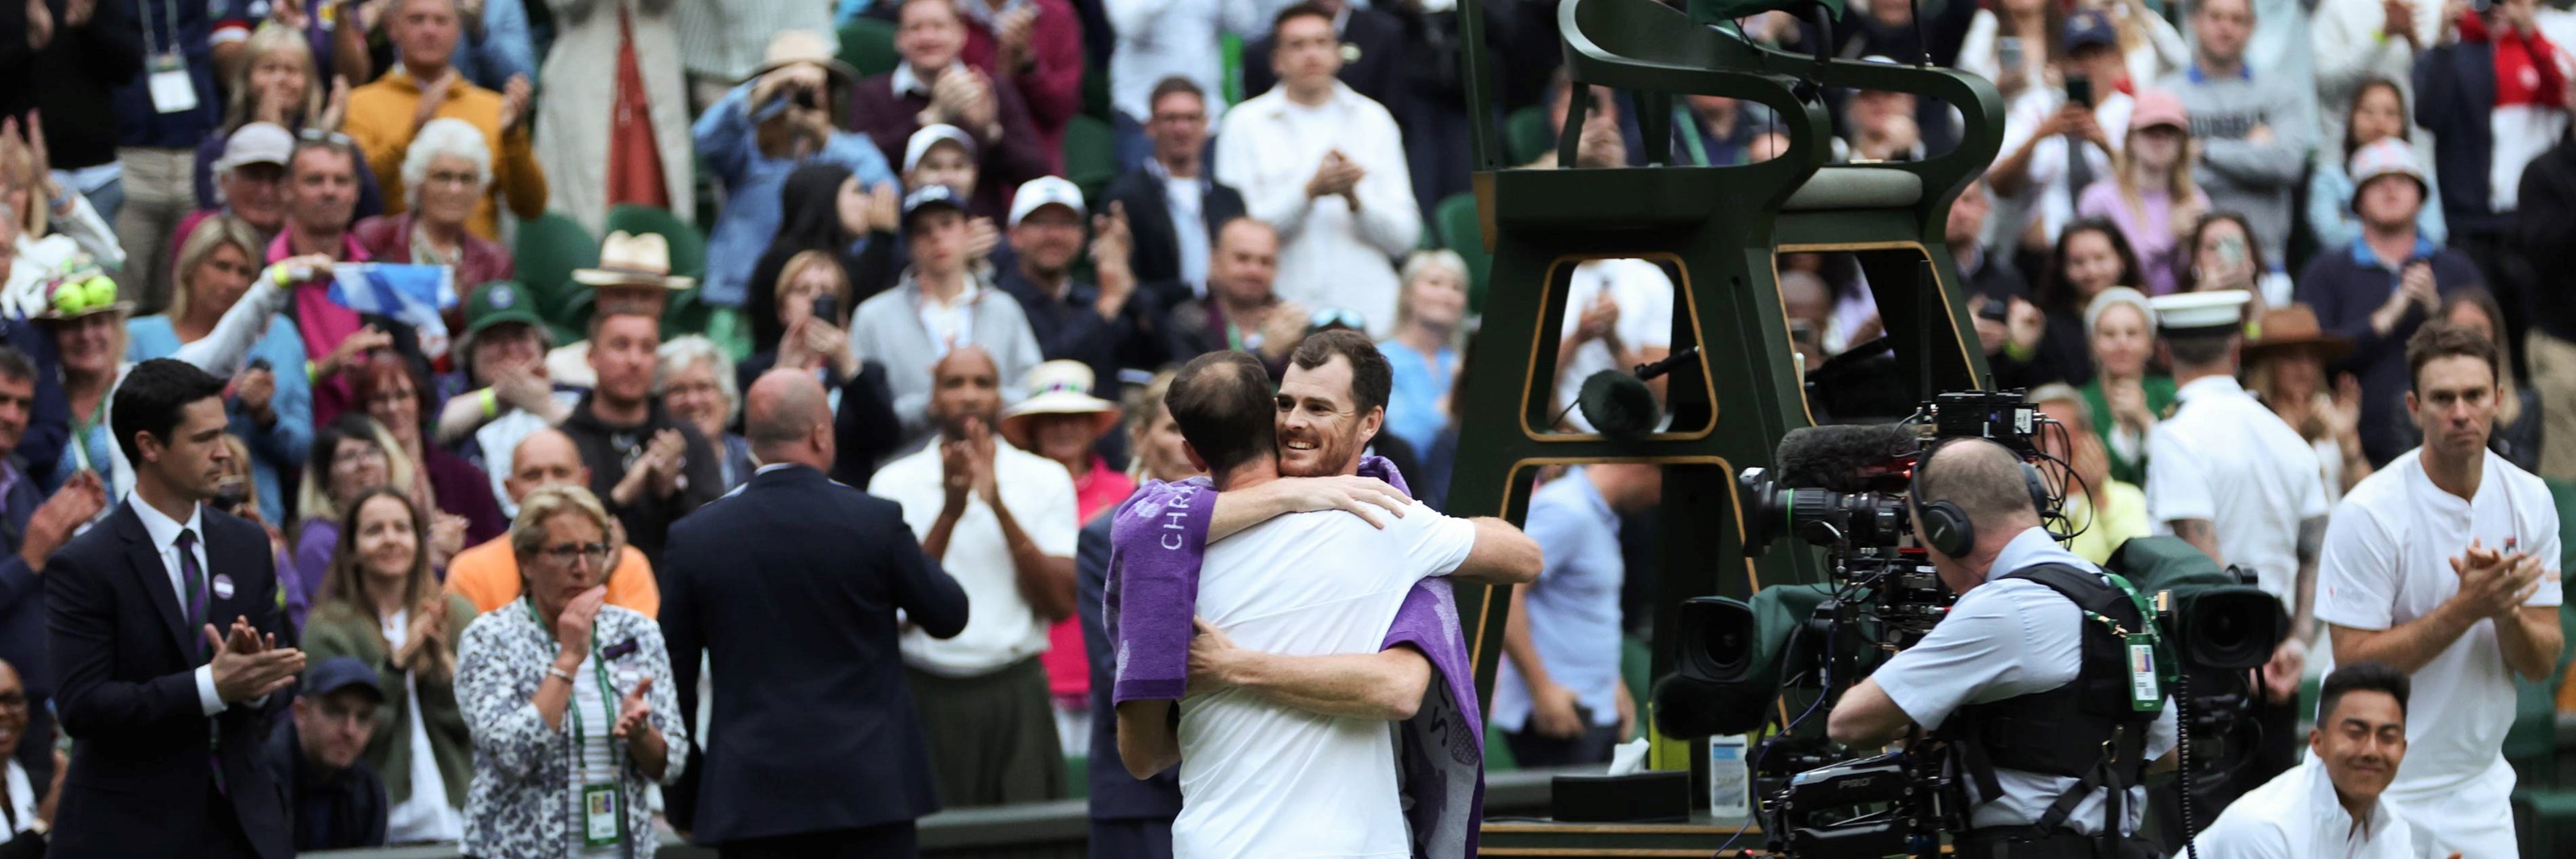 Andy Murray and Jamie Murray hug on court after their doubles match at Wimbledon